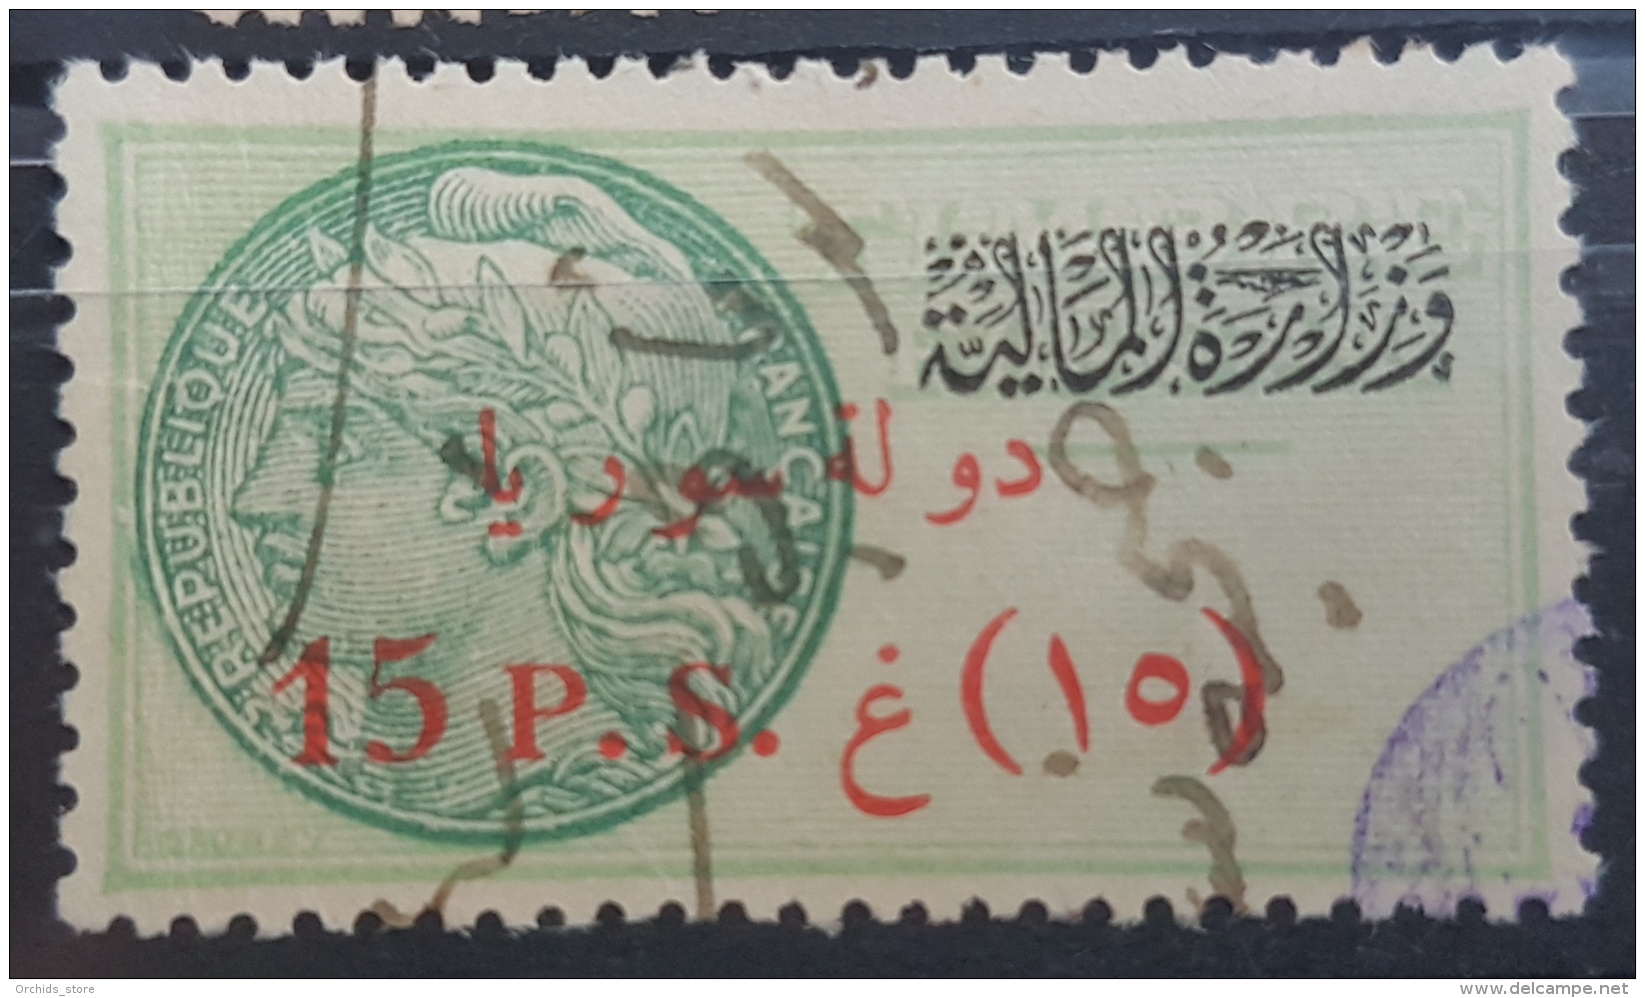 BB2 #63E - Syria 1932 Fiscal Revenue Stamp 15p (Vermilion Ovpt) With Black Rectangle Ministry Of Finance Control Ovpt - Syria